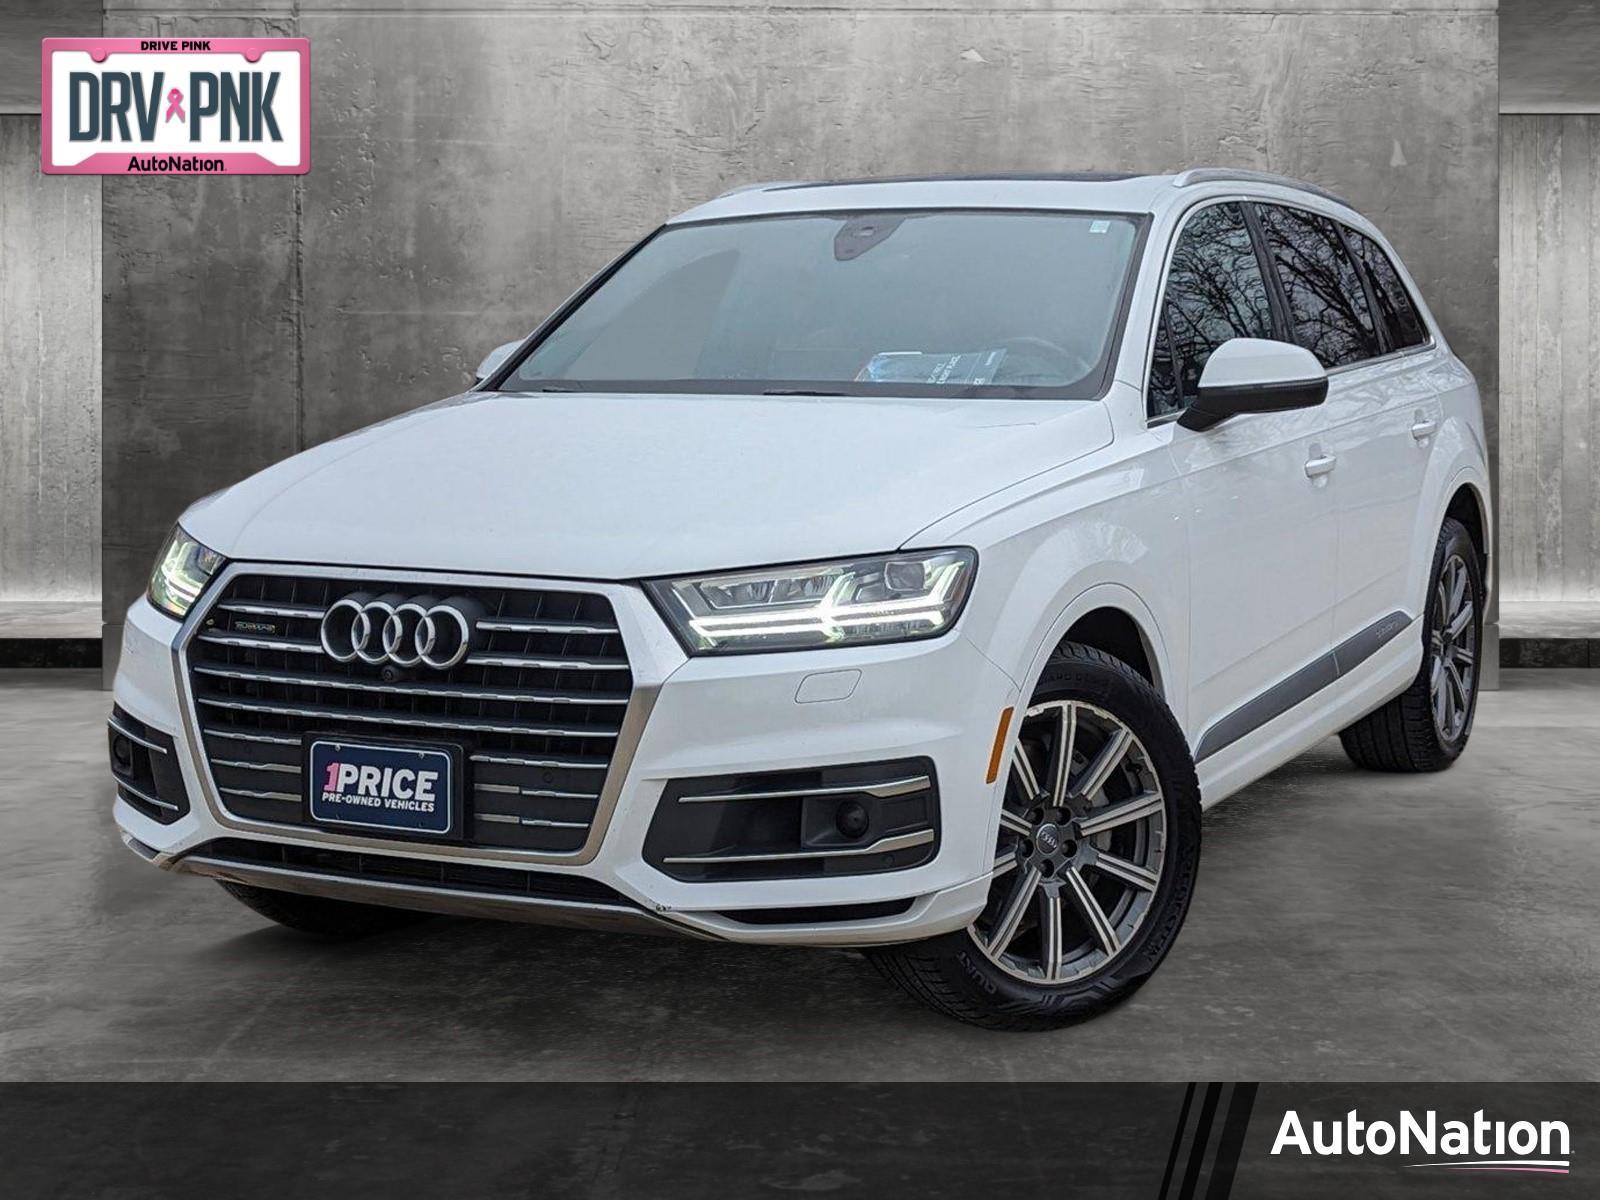 USED 2018 Audi Q7 for sale in Wickliffe, OH 44092 - AutoNation